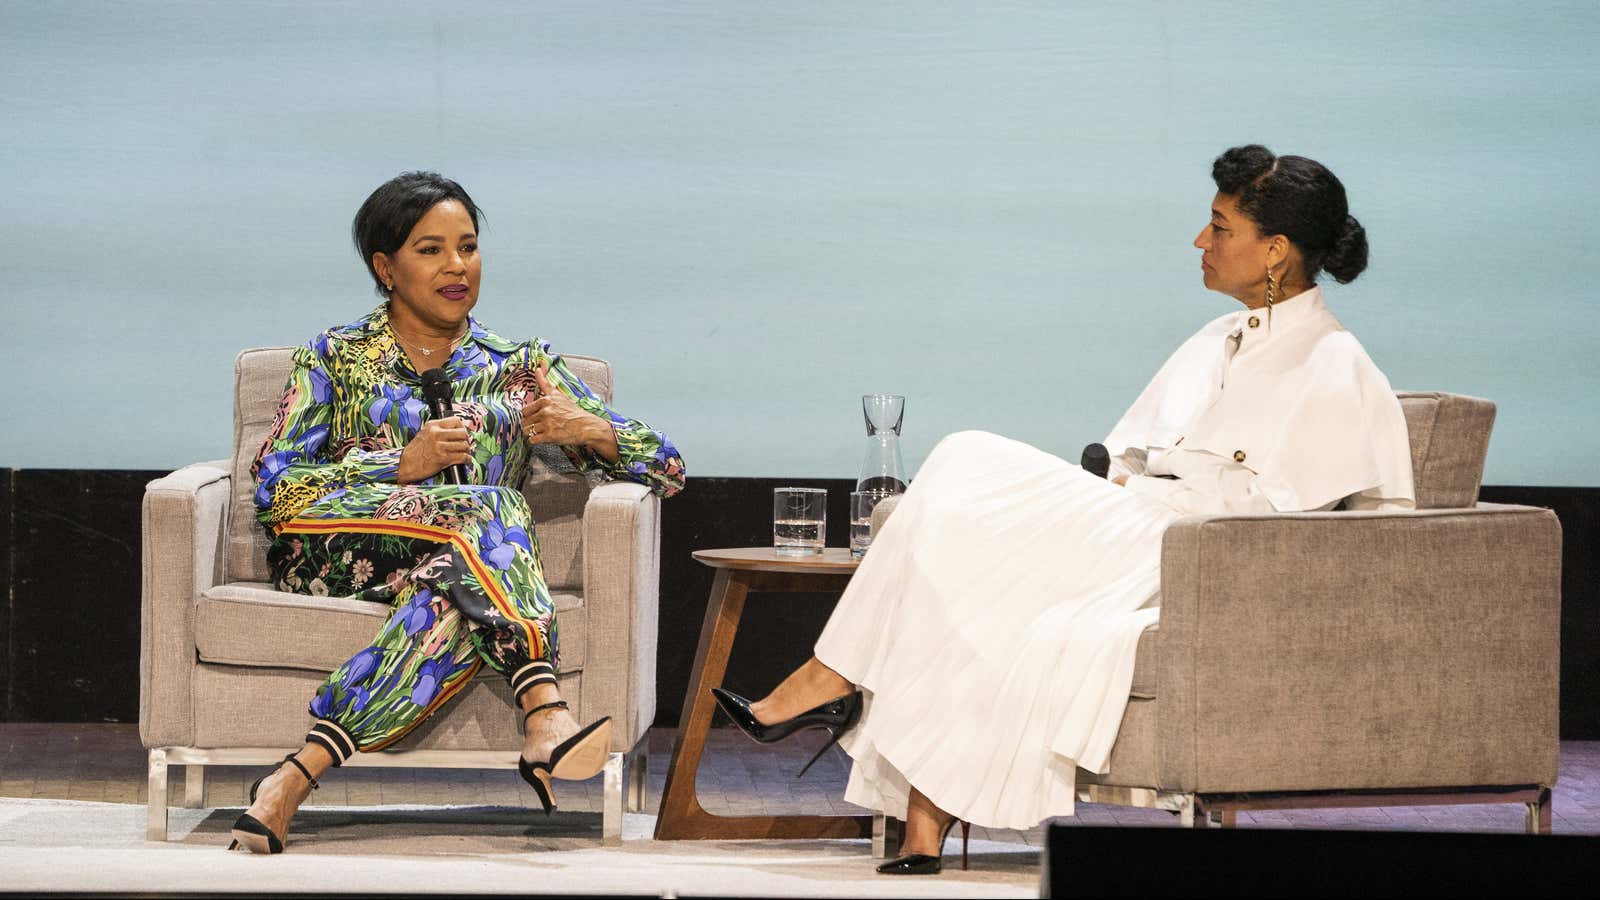 COOs like Starbuck’s Rosalind Brewer, here in conversations with Tracee Ellis Ross, embody a new era of corporate leadership.